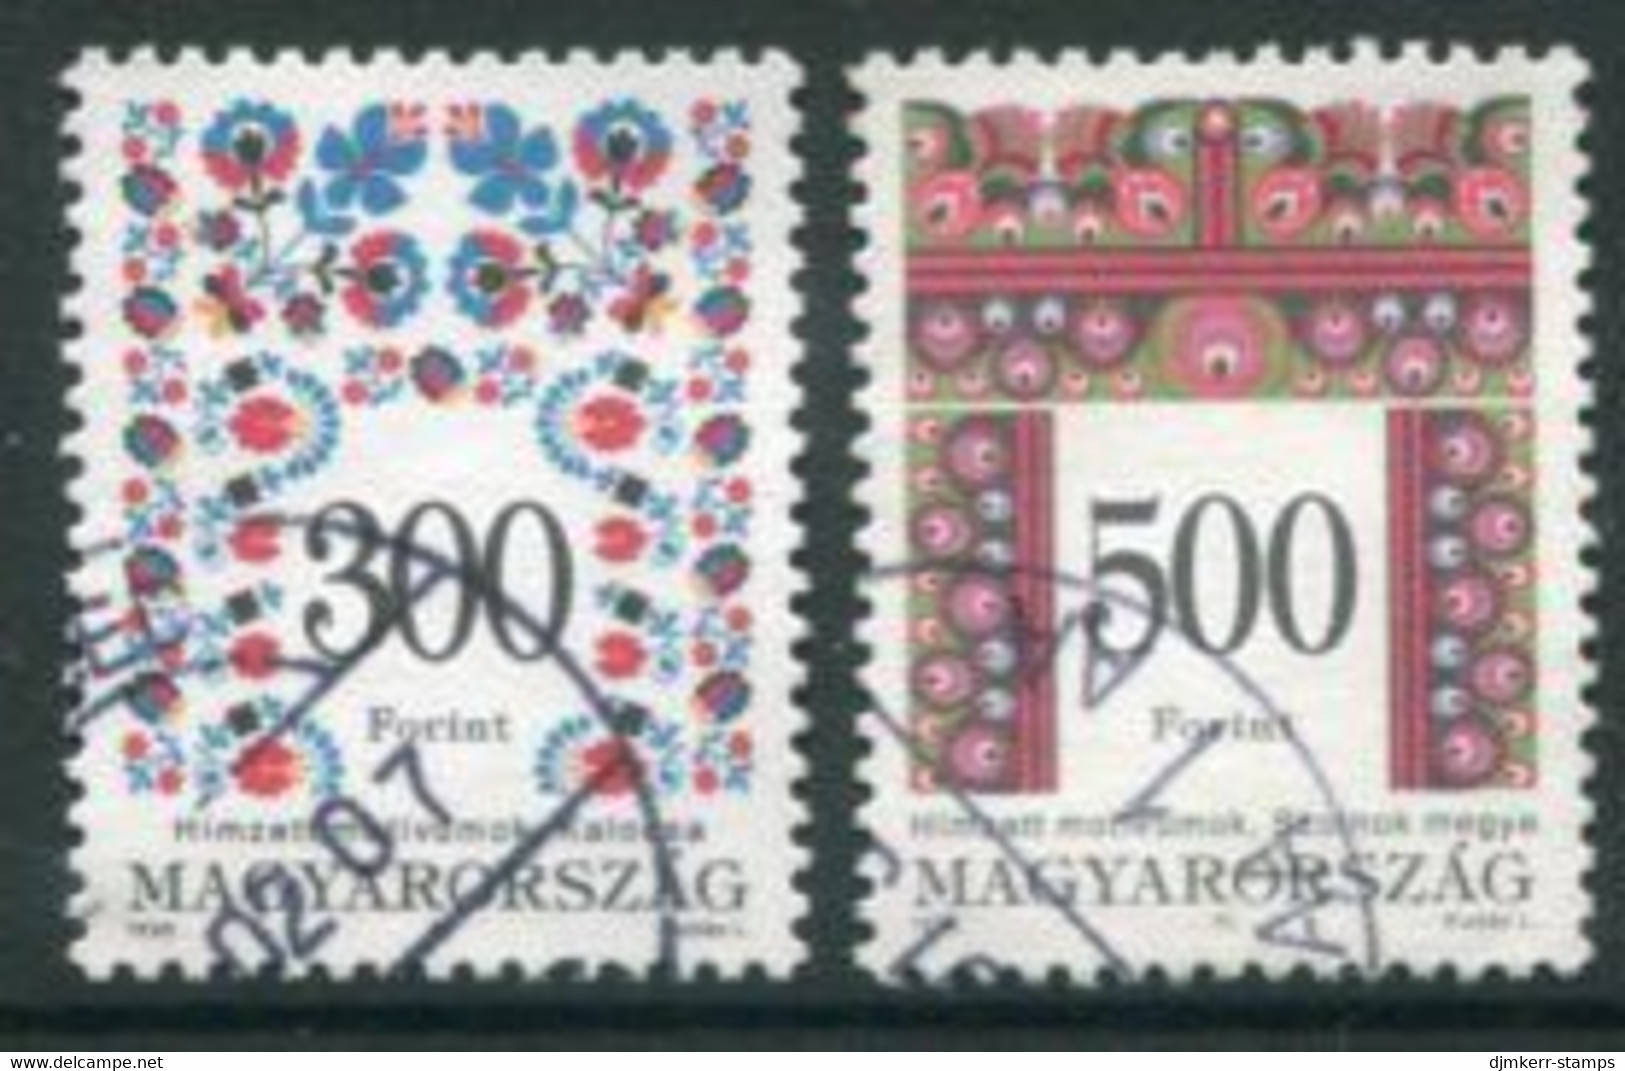 HUNGARY 1996 Folk Motif 300 And 500 Ft.  Used.  Michel 4409-10 - Used Stamps